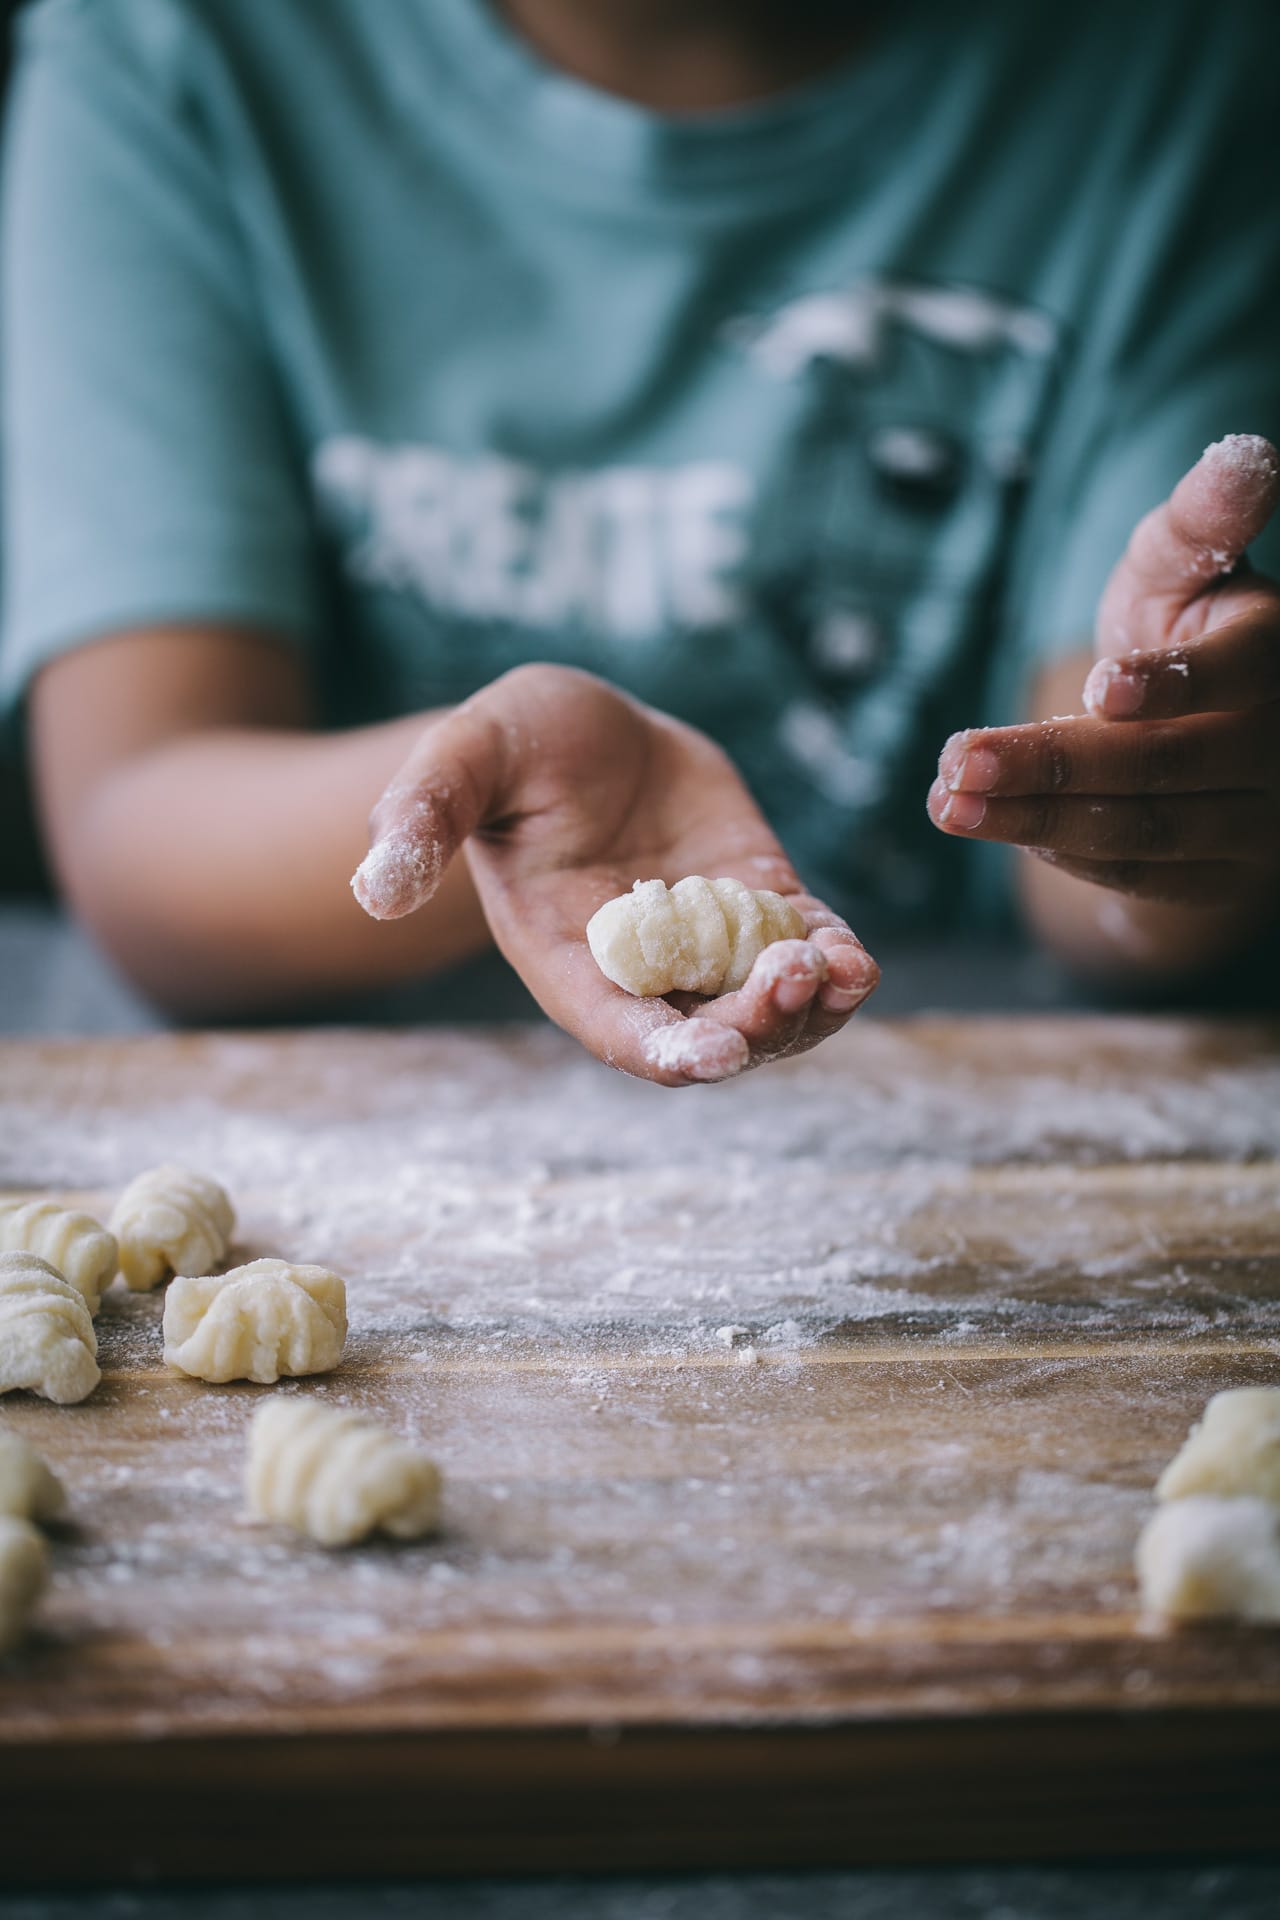 Cooking with kids!| Playful Cooking #potato #gnocchi #easy #pantrymeal #pasta #foodphotography